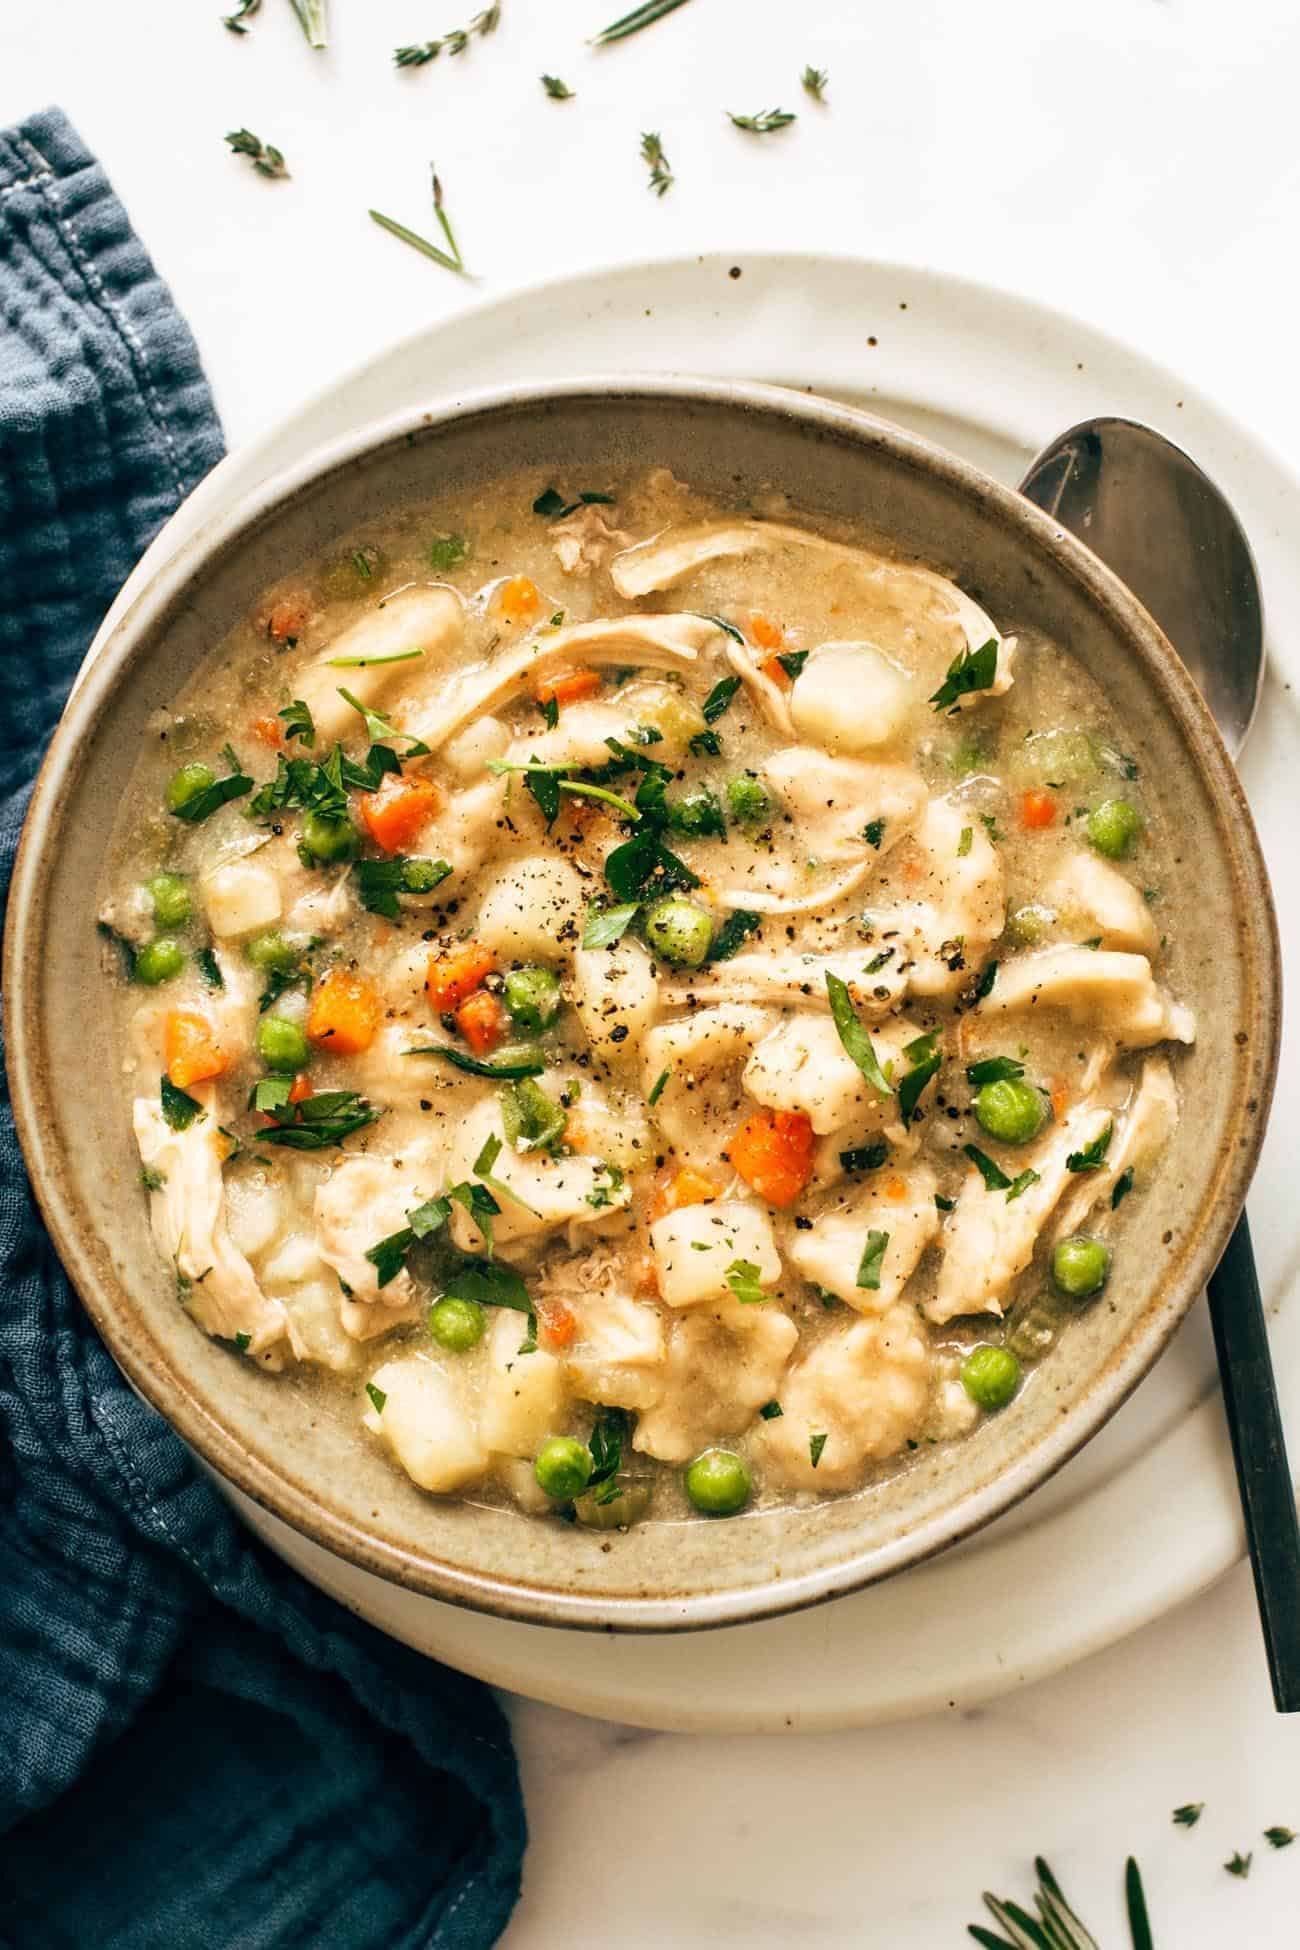 Instant Pot Chicken and Dumplings from Pinch of Yum